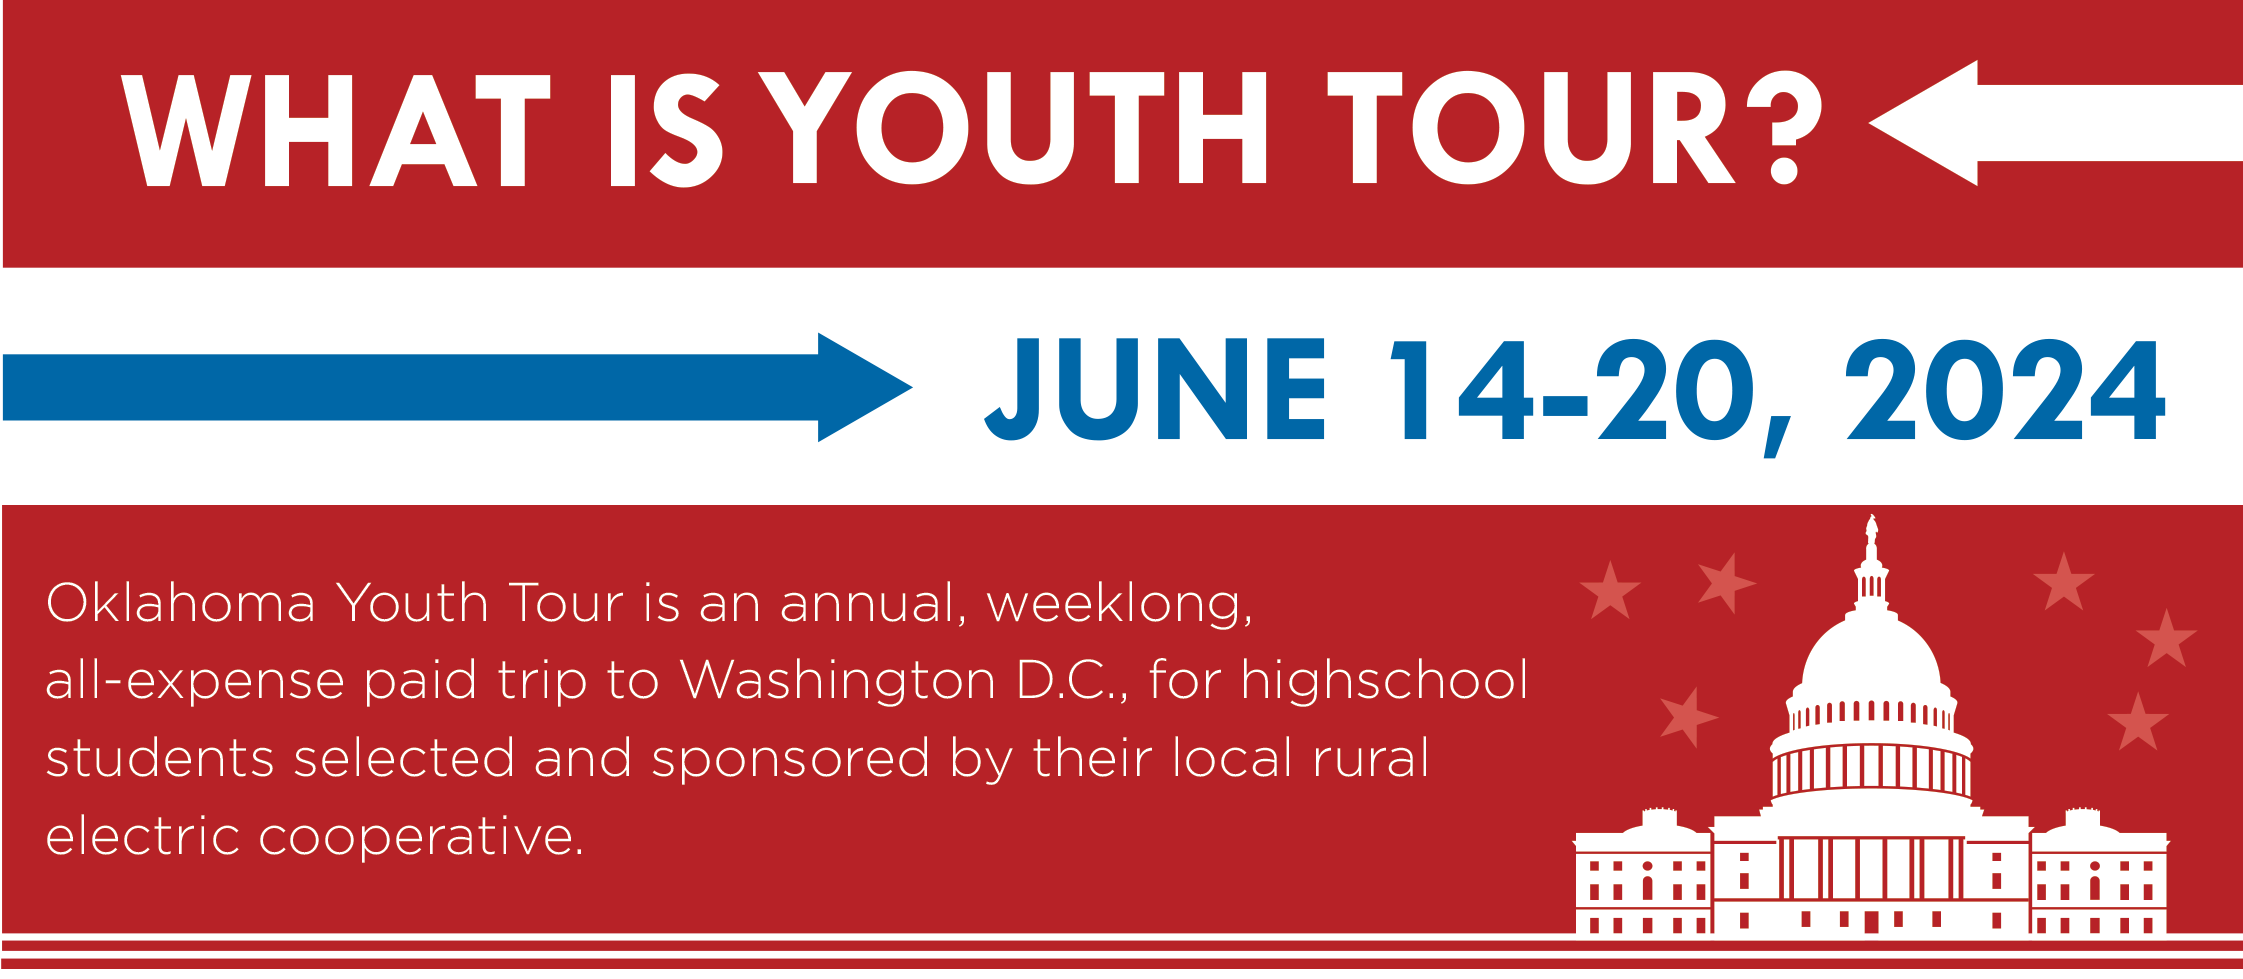 Youth Tour date